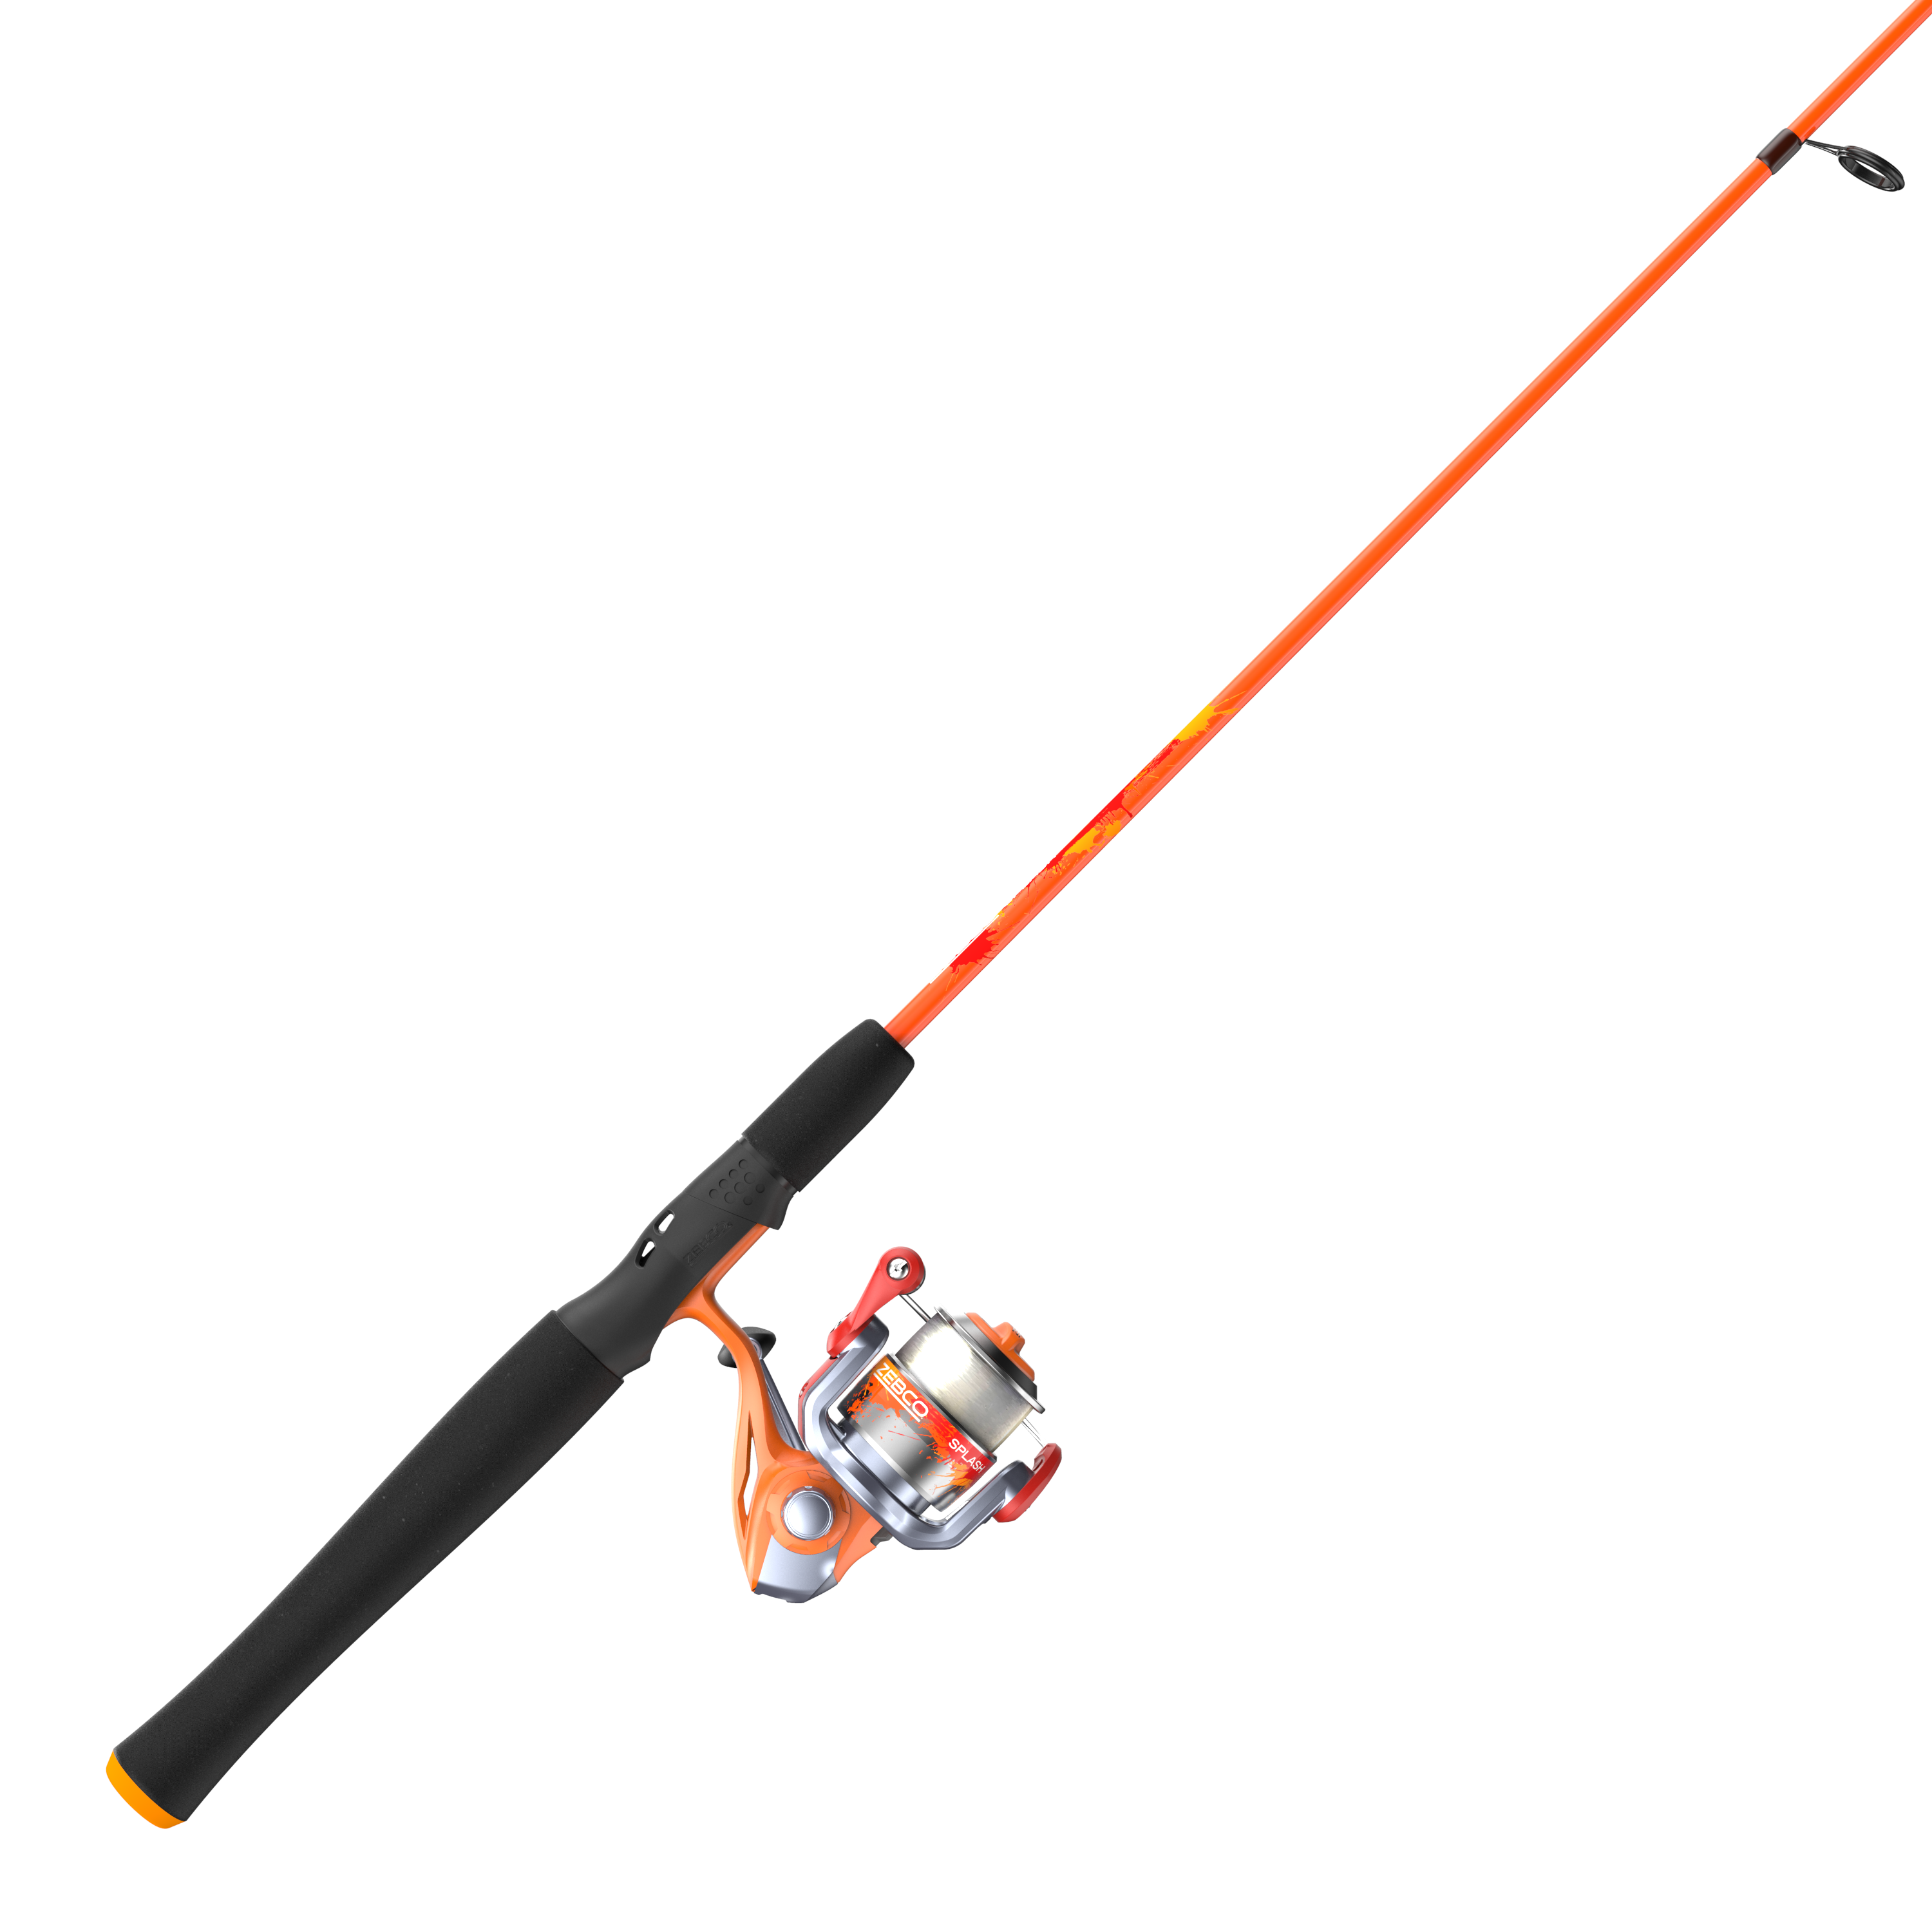  Martin Fly Fishing Complete Kit, 8-Foot 5/6-Weight 3-Piece  Fly Fishing Pole, Size 5/6 Rim-Control Reel, Pre-spooled